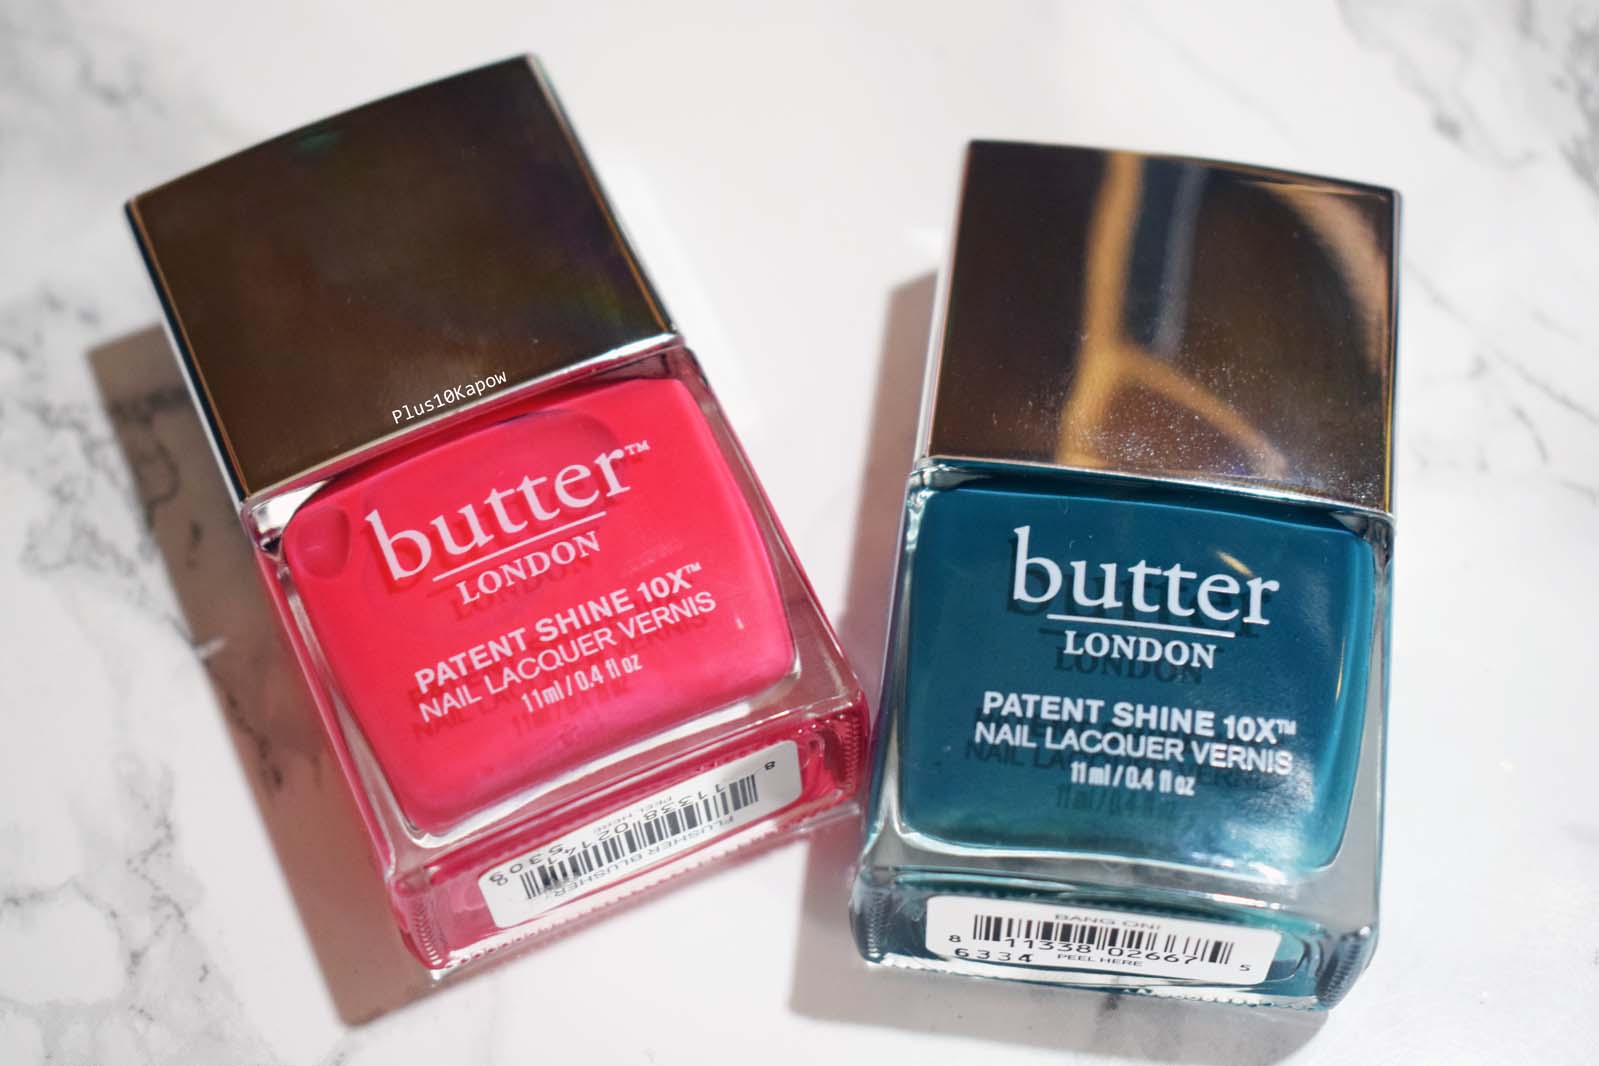 7. Butter London Patent Shine 10X Nail Lacquer in "Afters" - wide 5